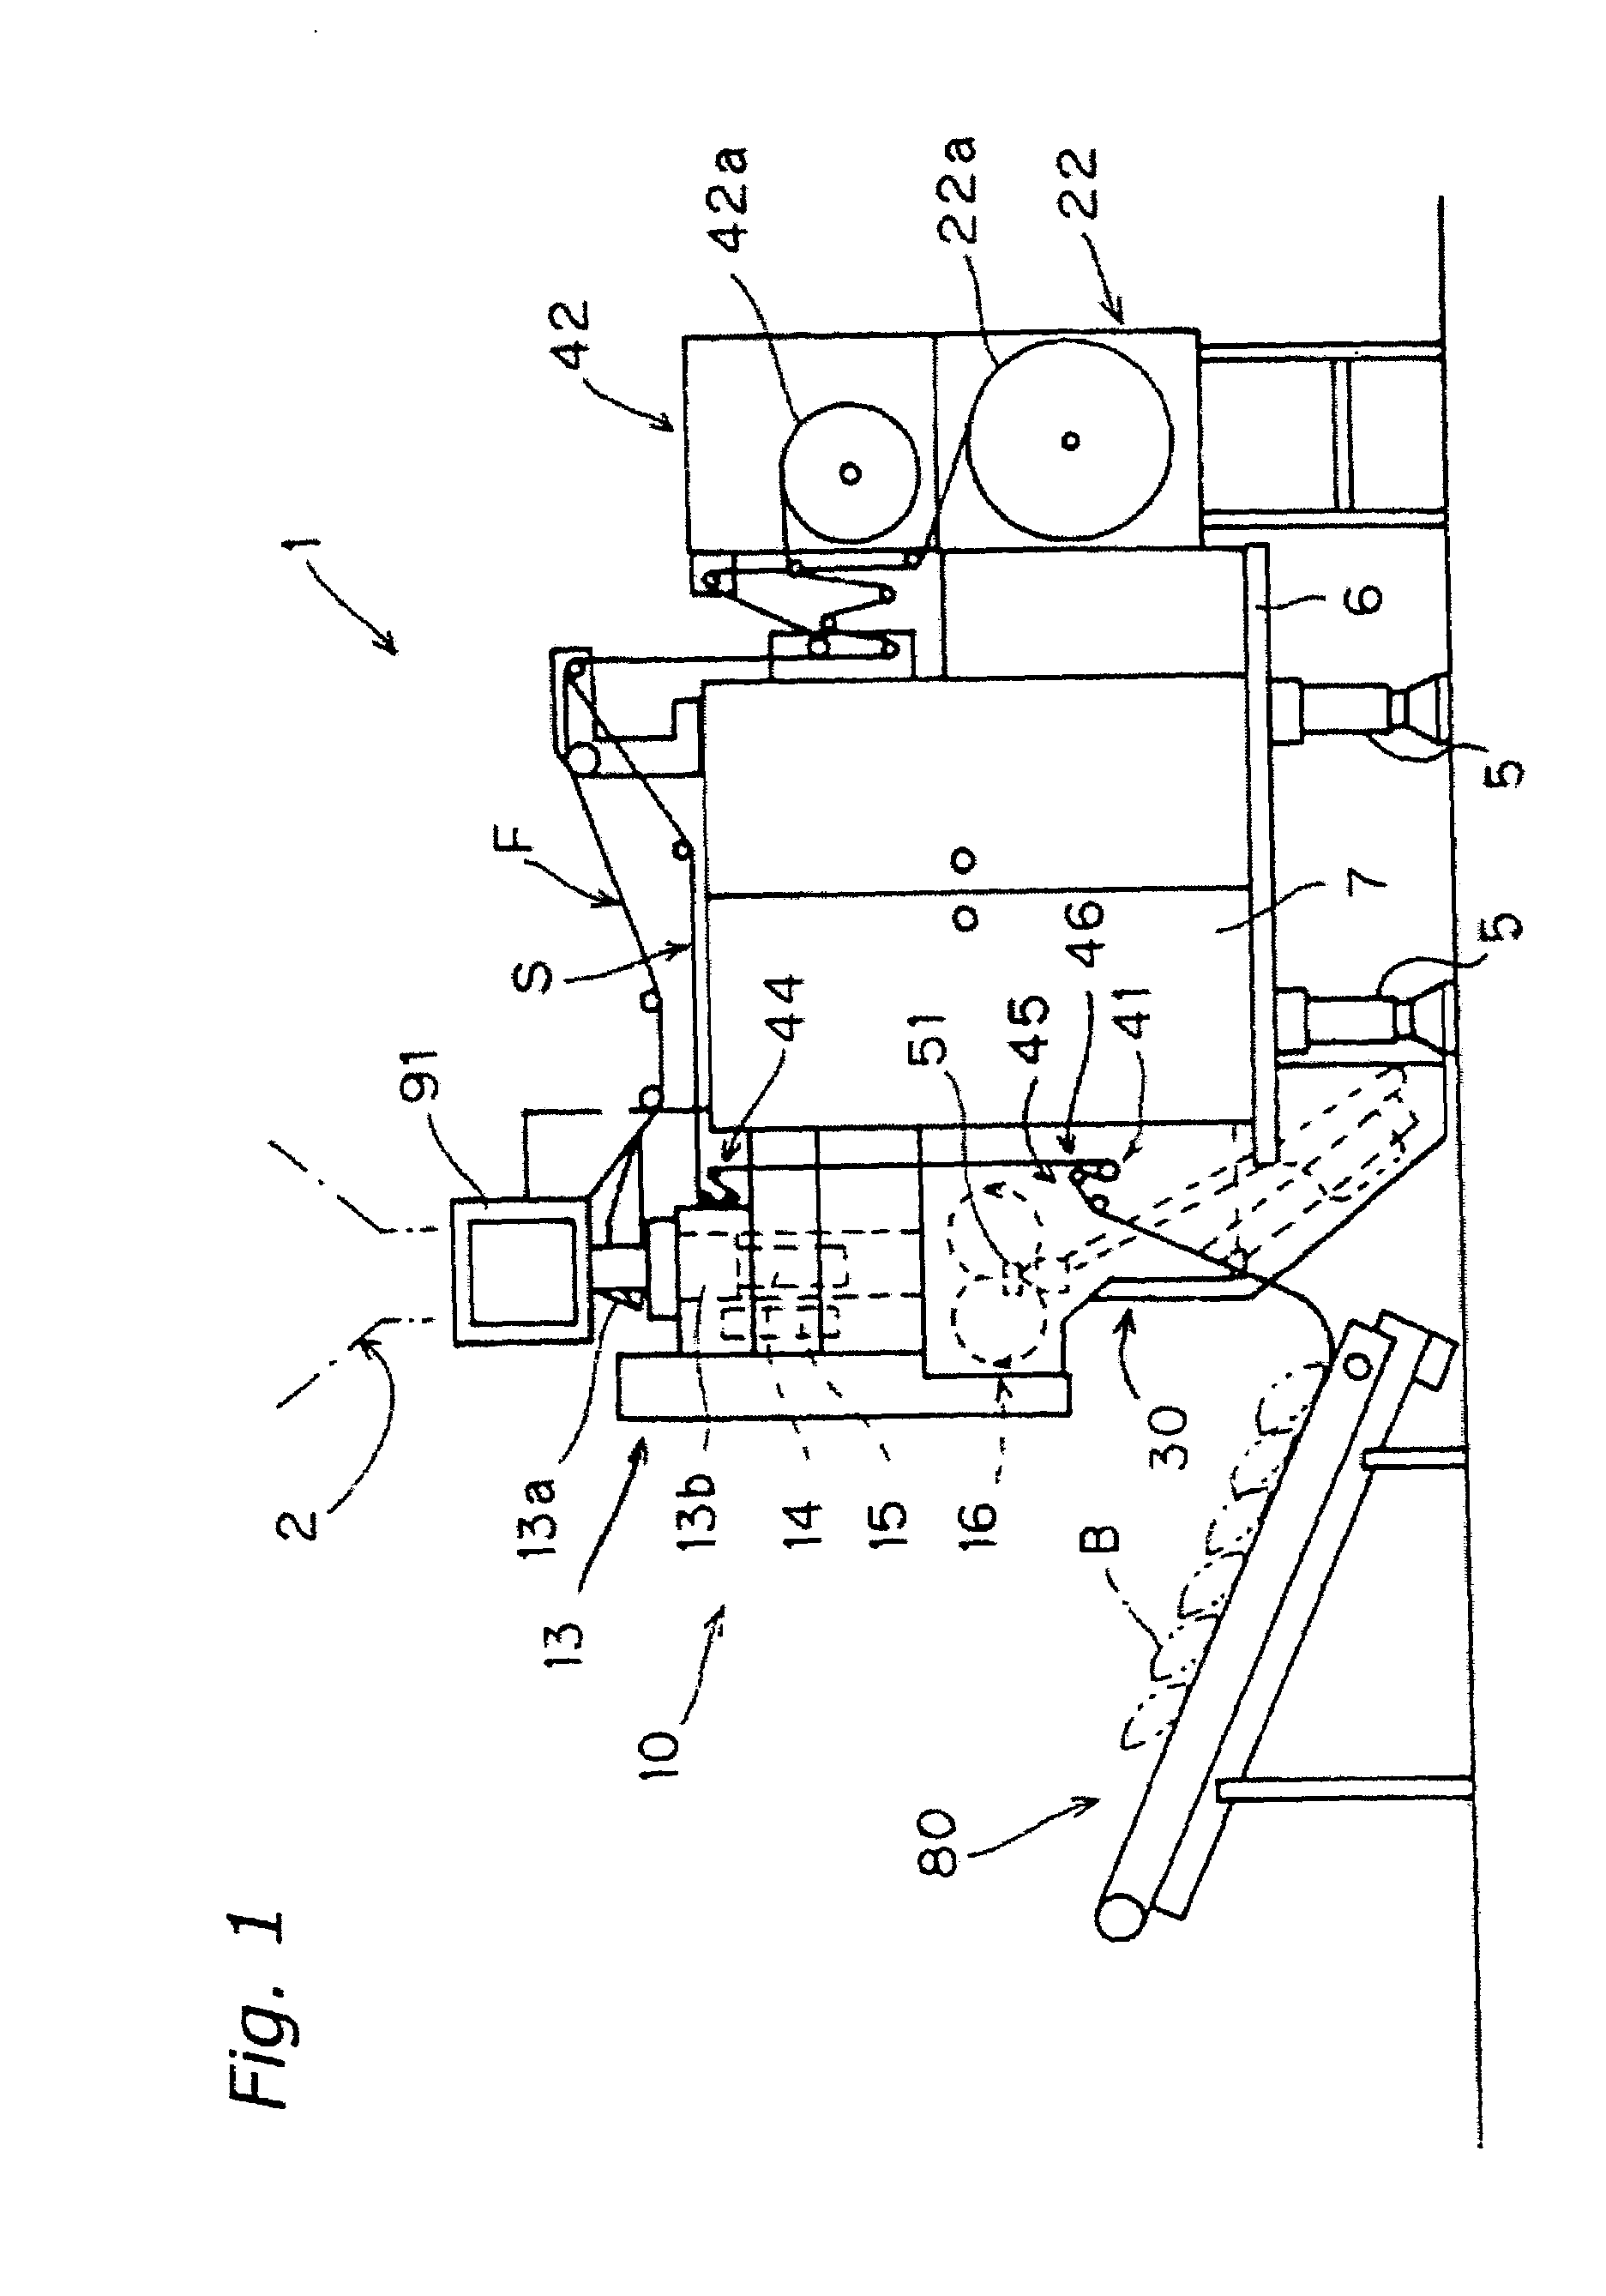 Bag manufacturing and packaging apparatus